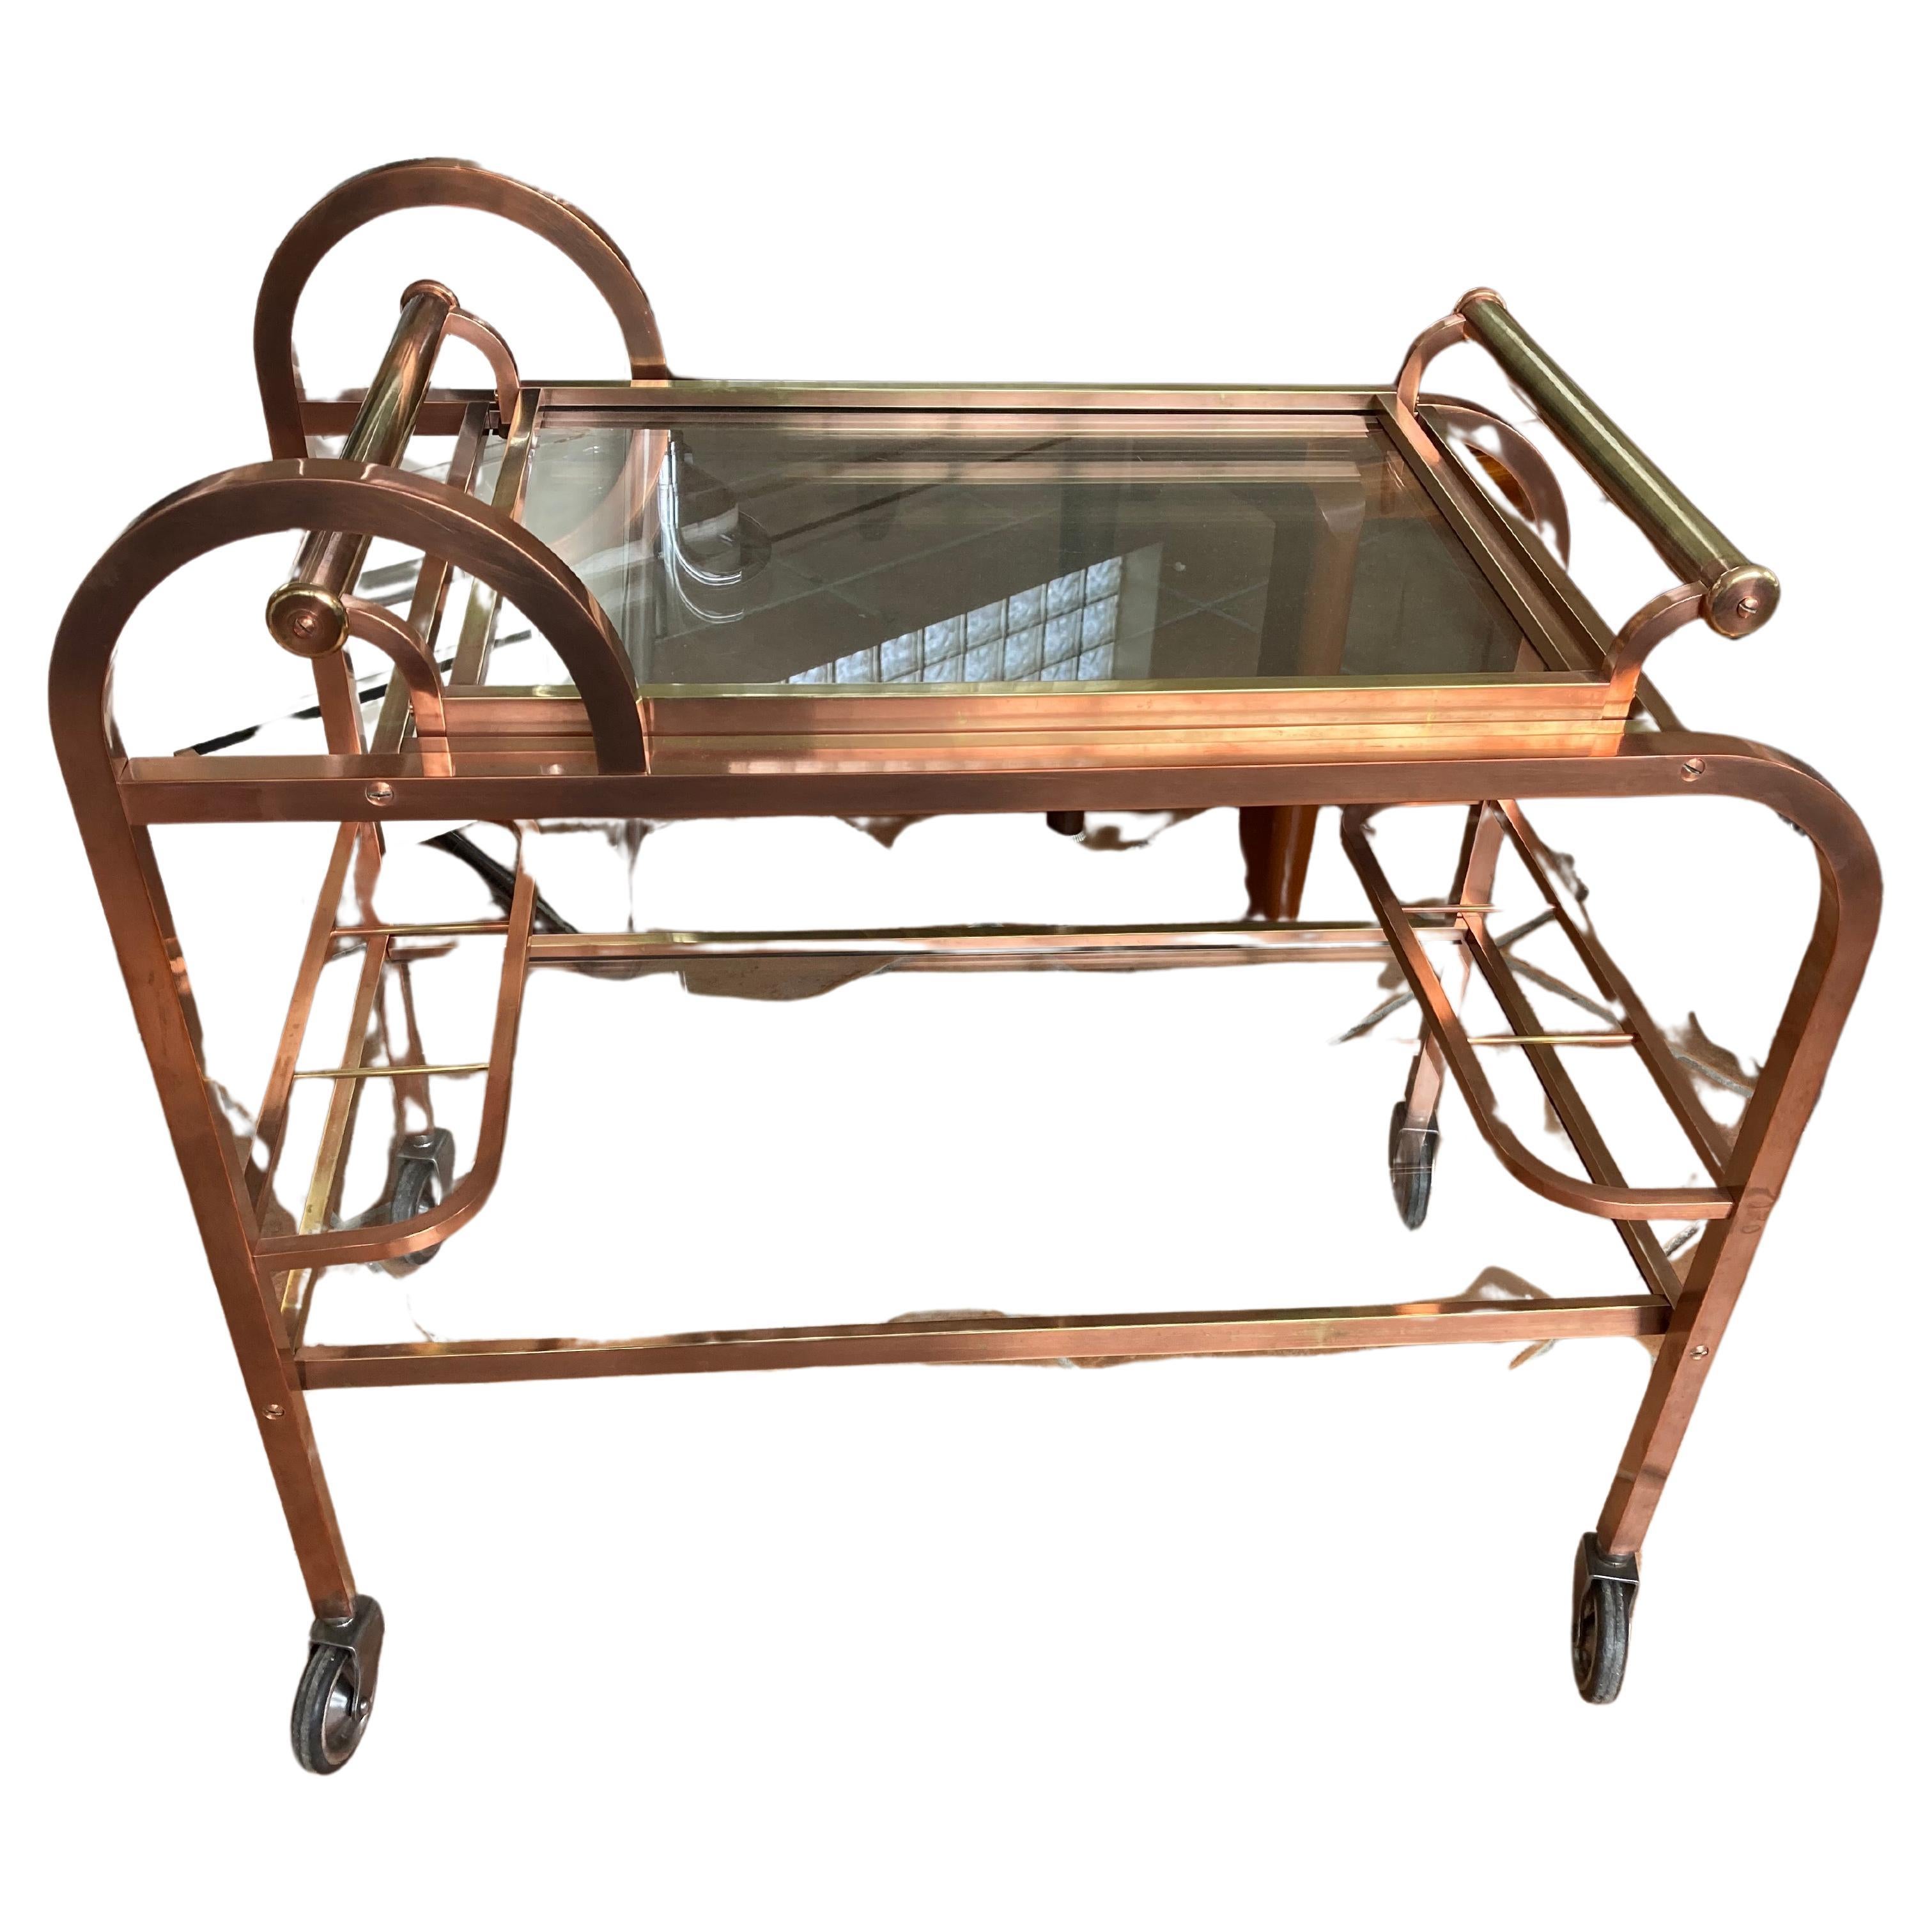 French Art Déco Bar Cart in Copper and Brass, 1920s